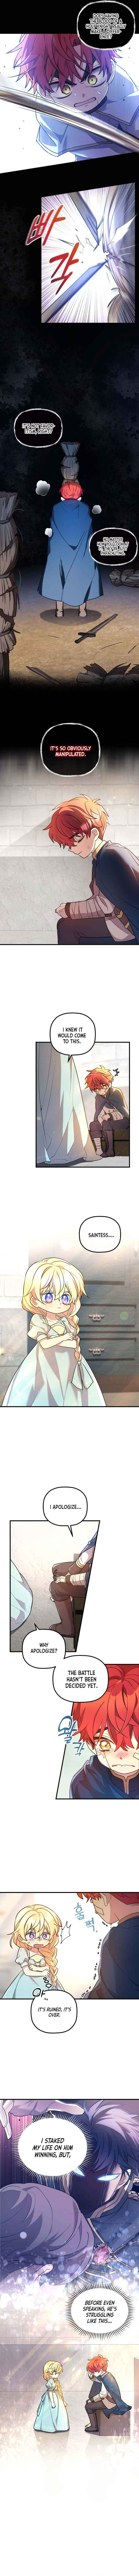 The Baby Saint Wants to Destroy the World! chapter 10